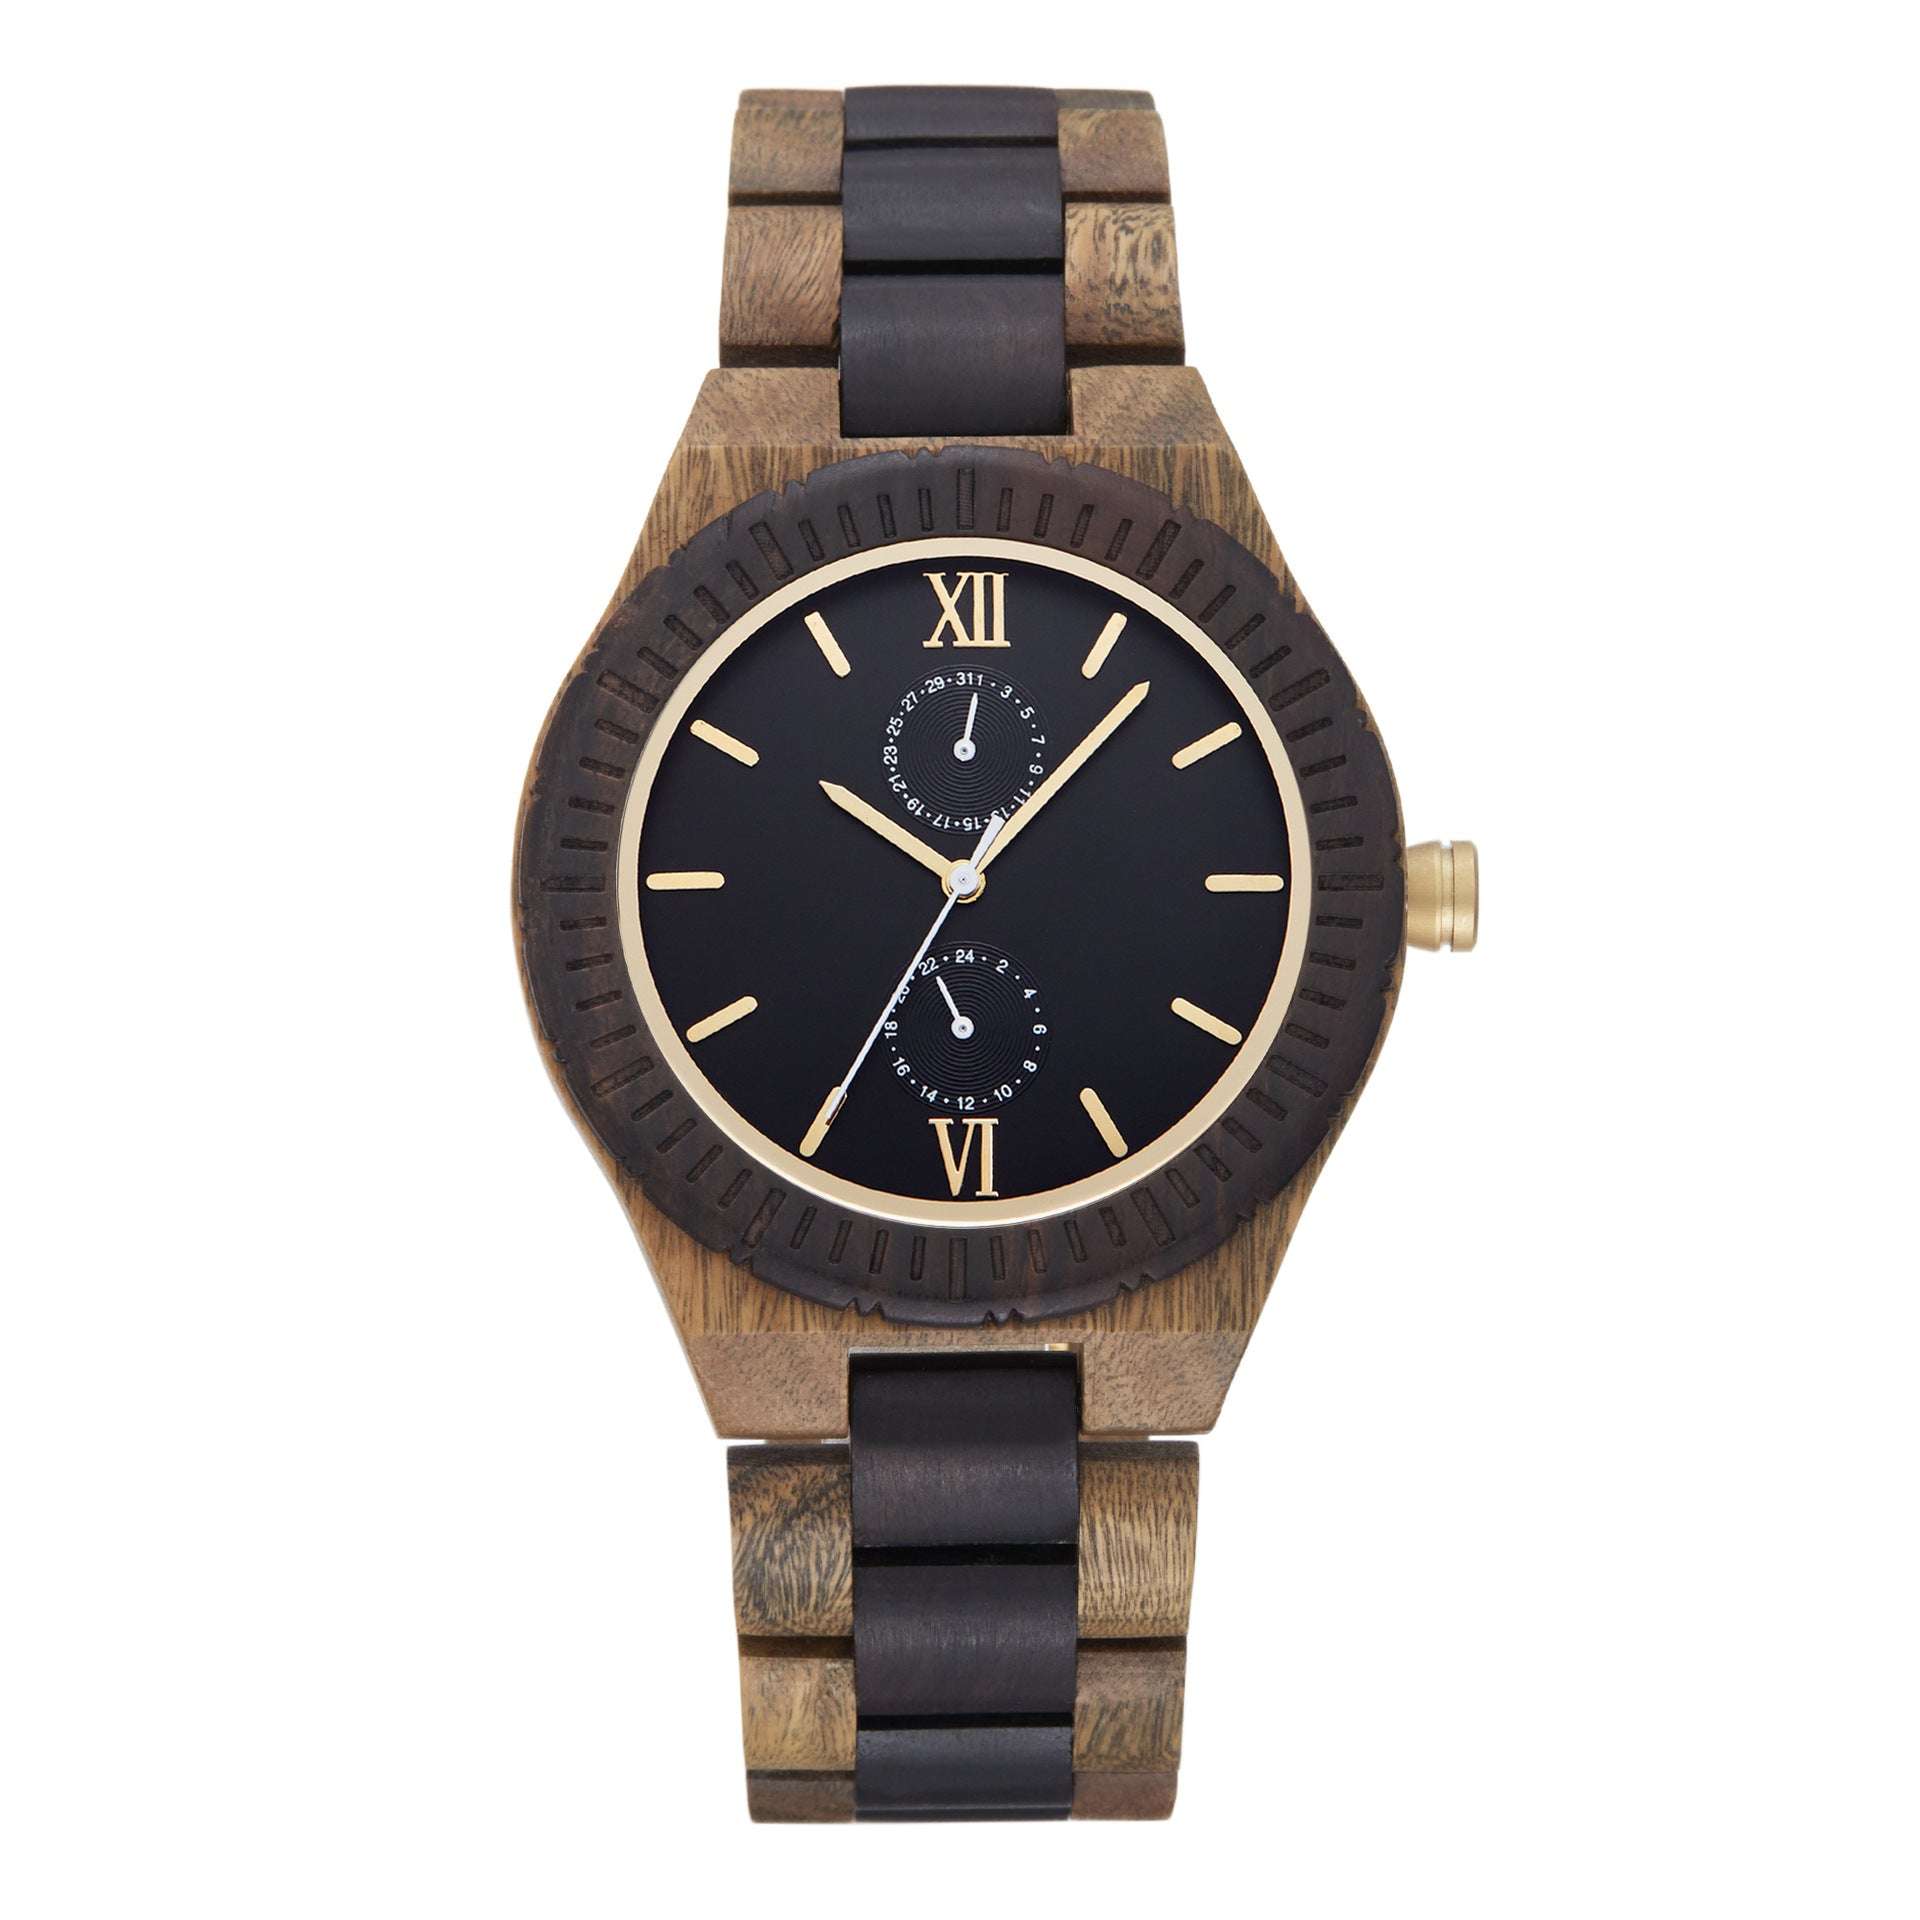 Eco-Friendly Wooden Watch, Men's Wooden Quartz Watch, Multi-Functional Wooden Watch - available at Sparq Mart